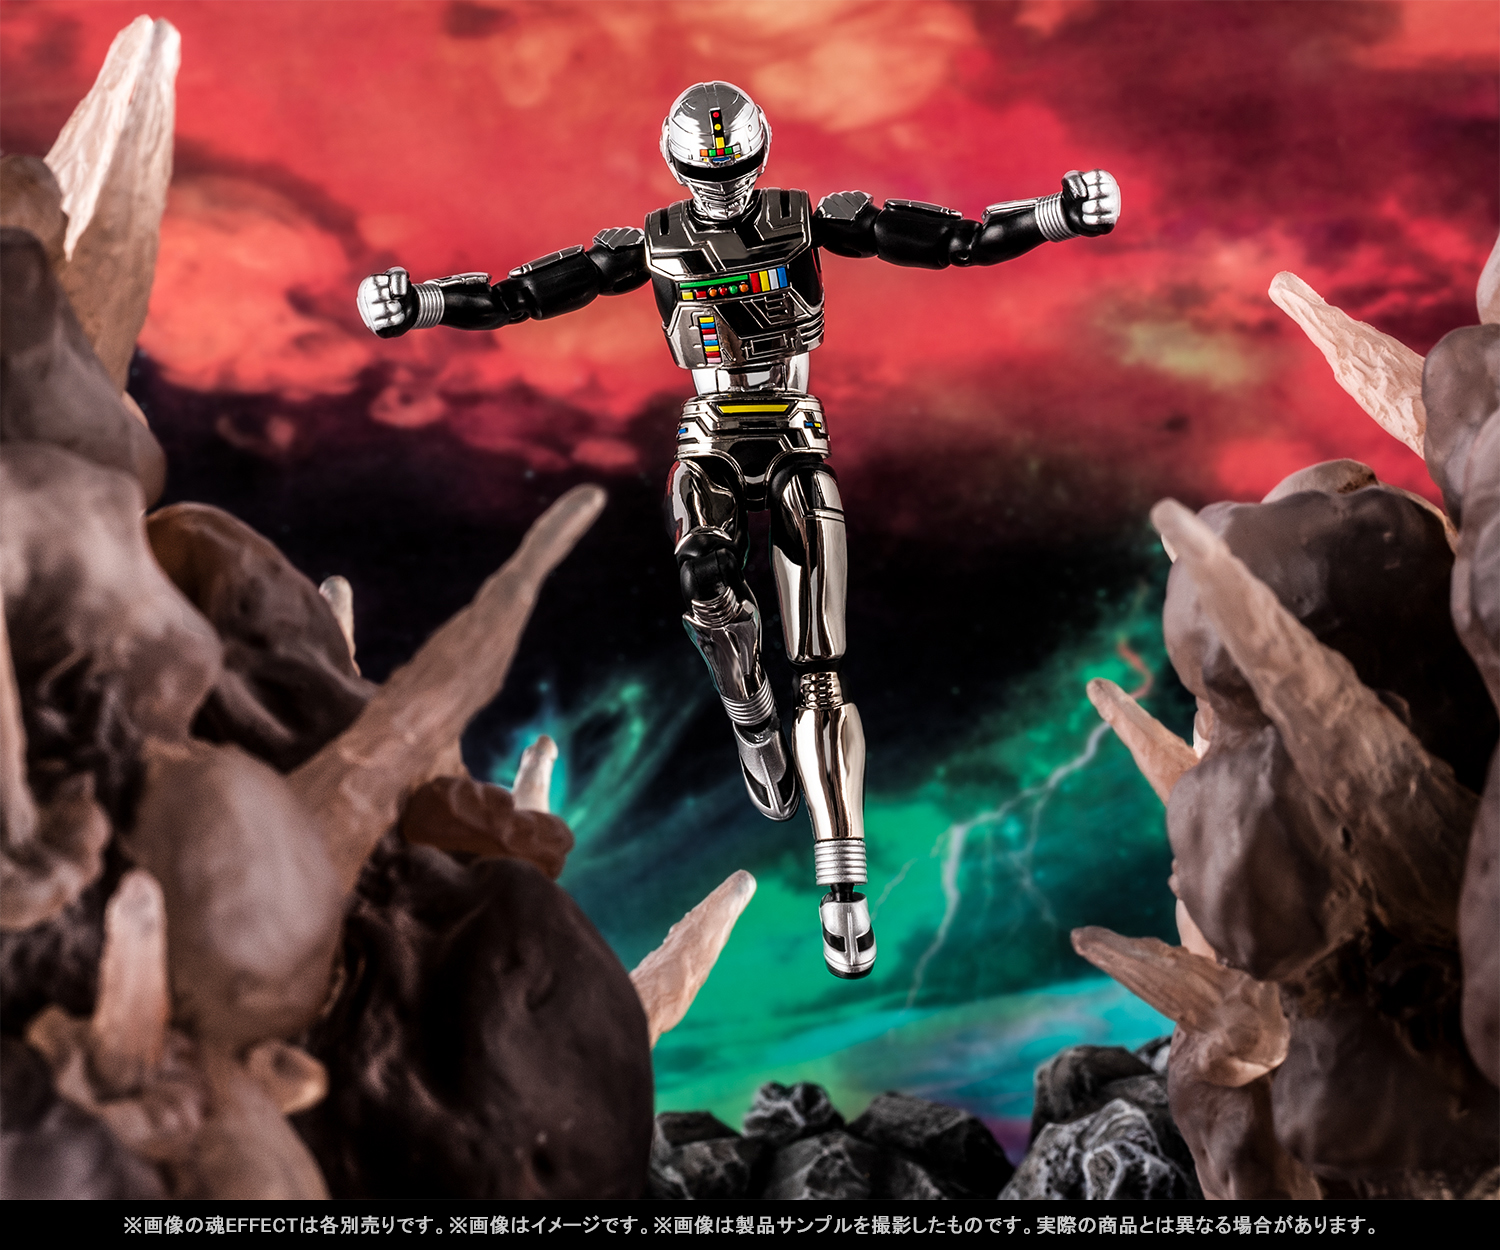 Gavan&#39;s Deposition comes to CHOGOKIN! Today we&#39;re introducing CHOGOKIN SPACE SHERIFF GAVAN &amp; SYBARIAN with prototype photos! Releases on April 22!